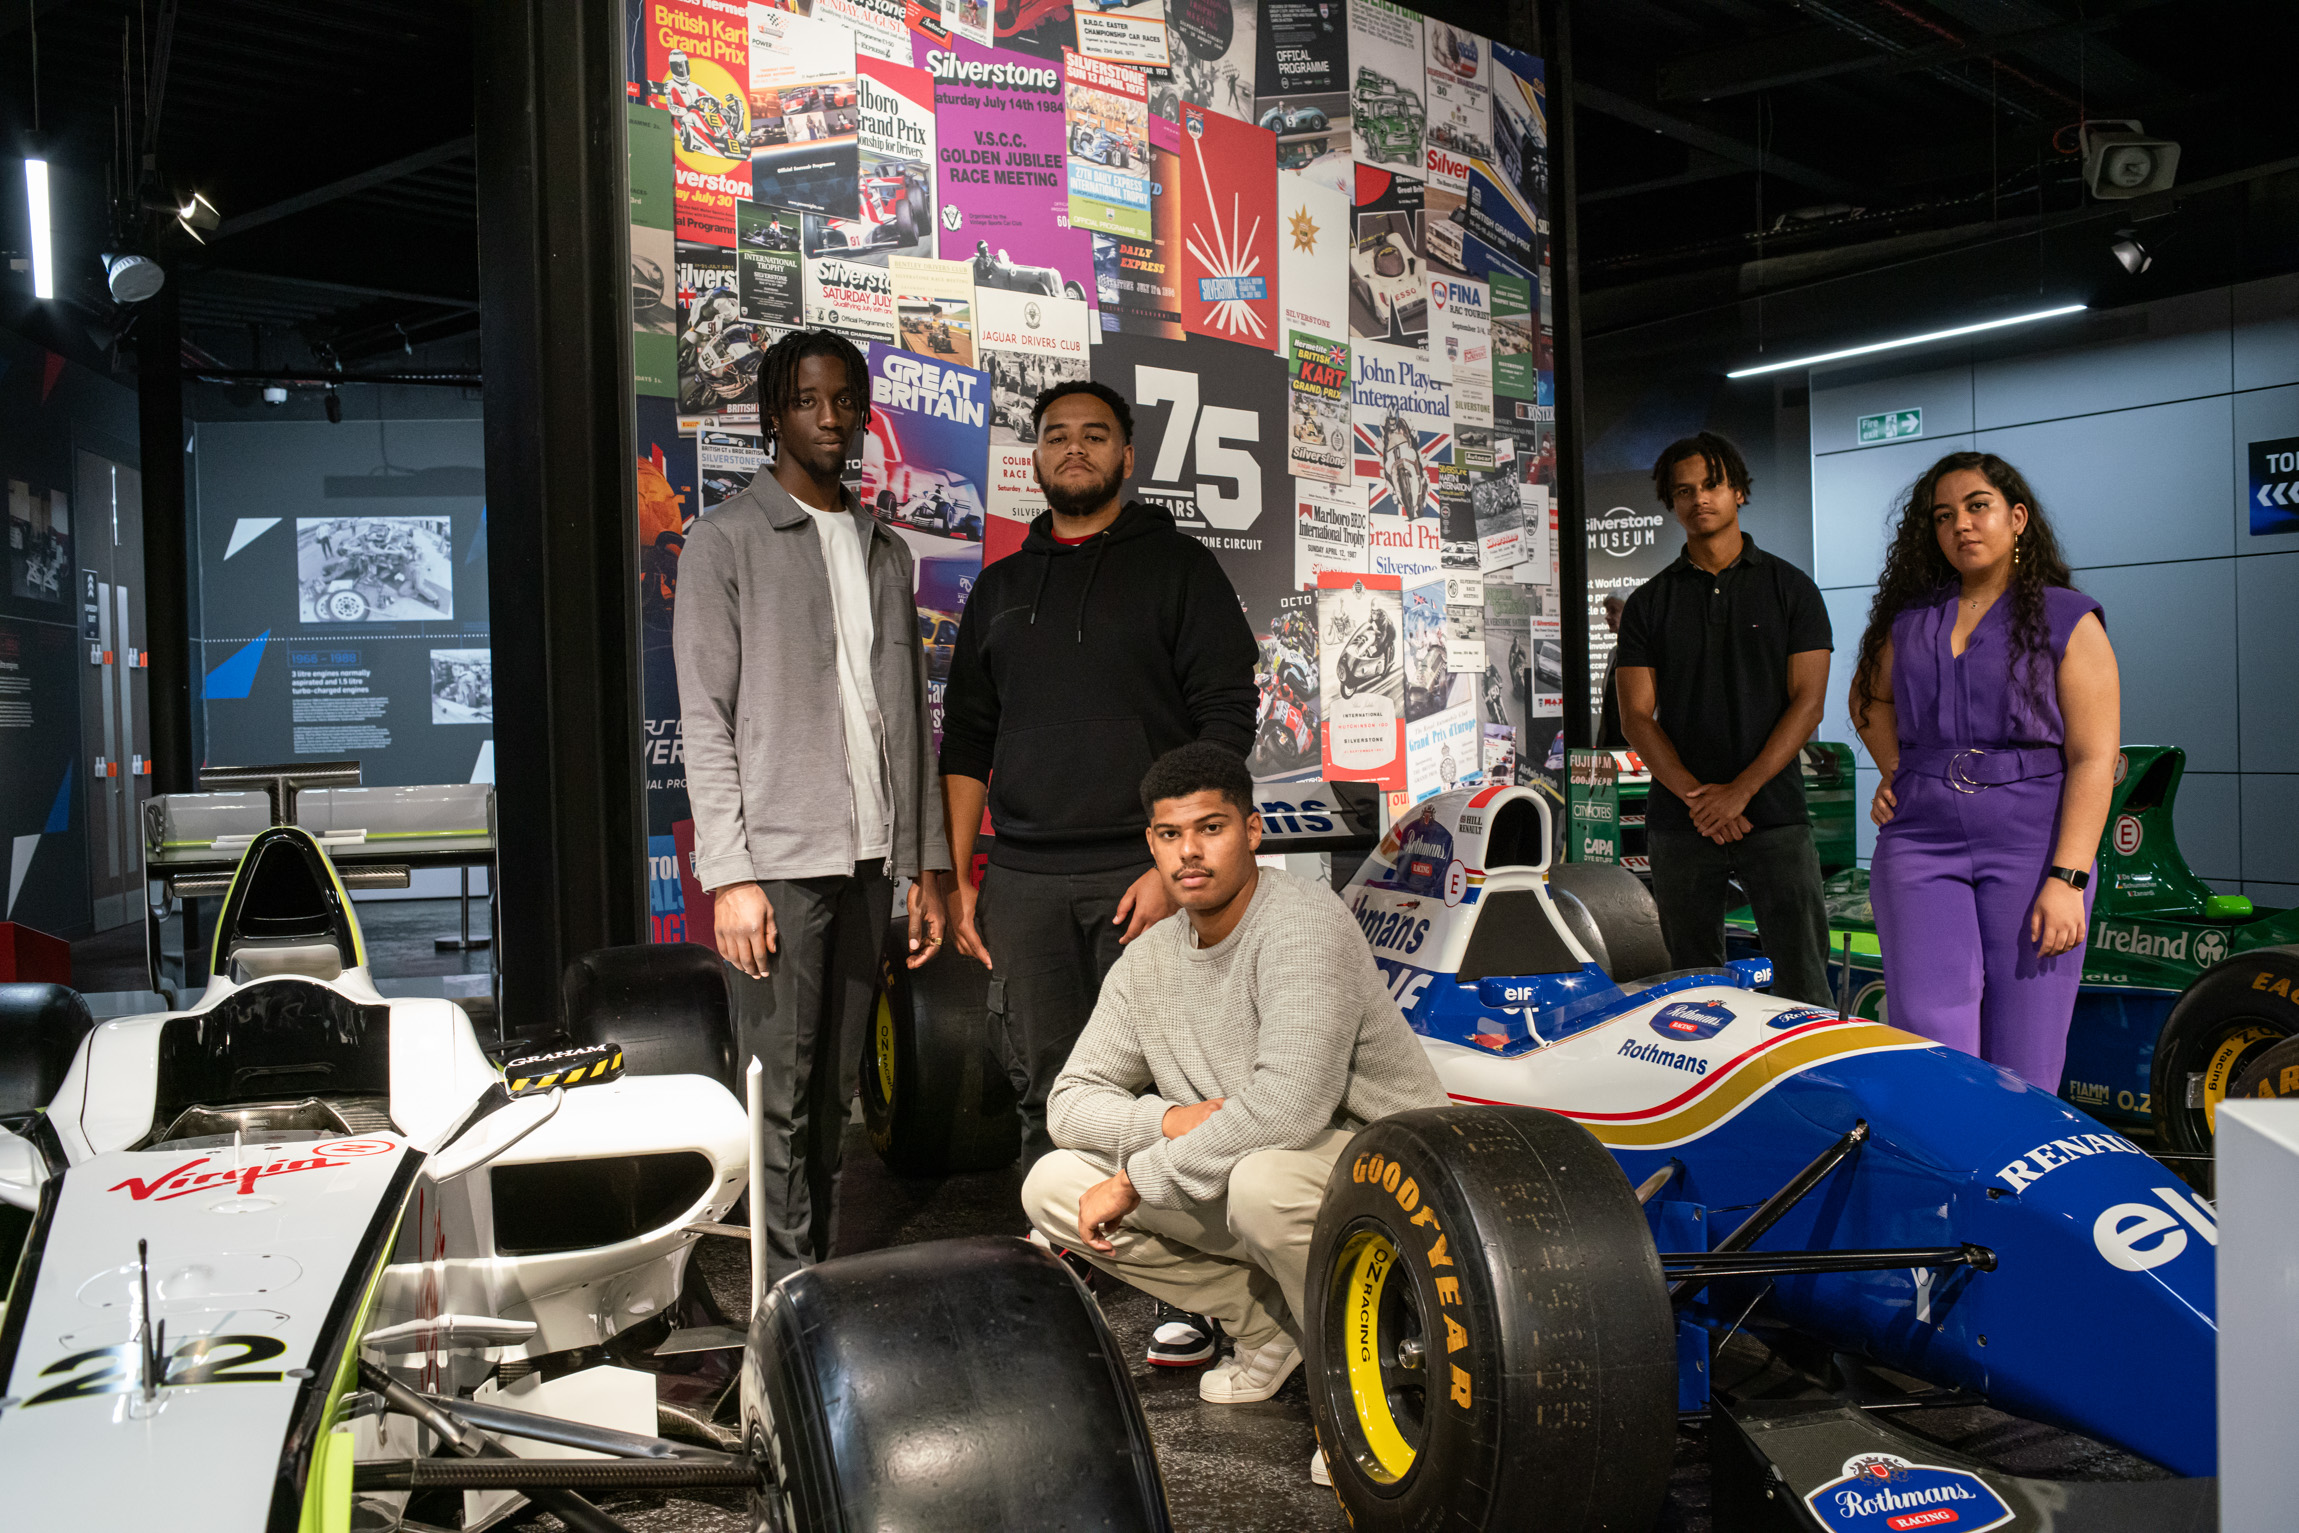 The five recipients of the first MSc motorsport engineering scholarships during their visit to the Silverstone Museum.  From left to right: Jonathan Keeya, Amjad Saeed, Nevin Hall, Benjamin Woodhouse, and Laila Fadli Dokkali